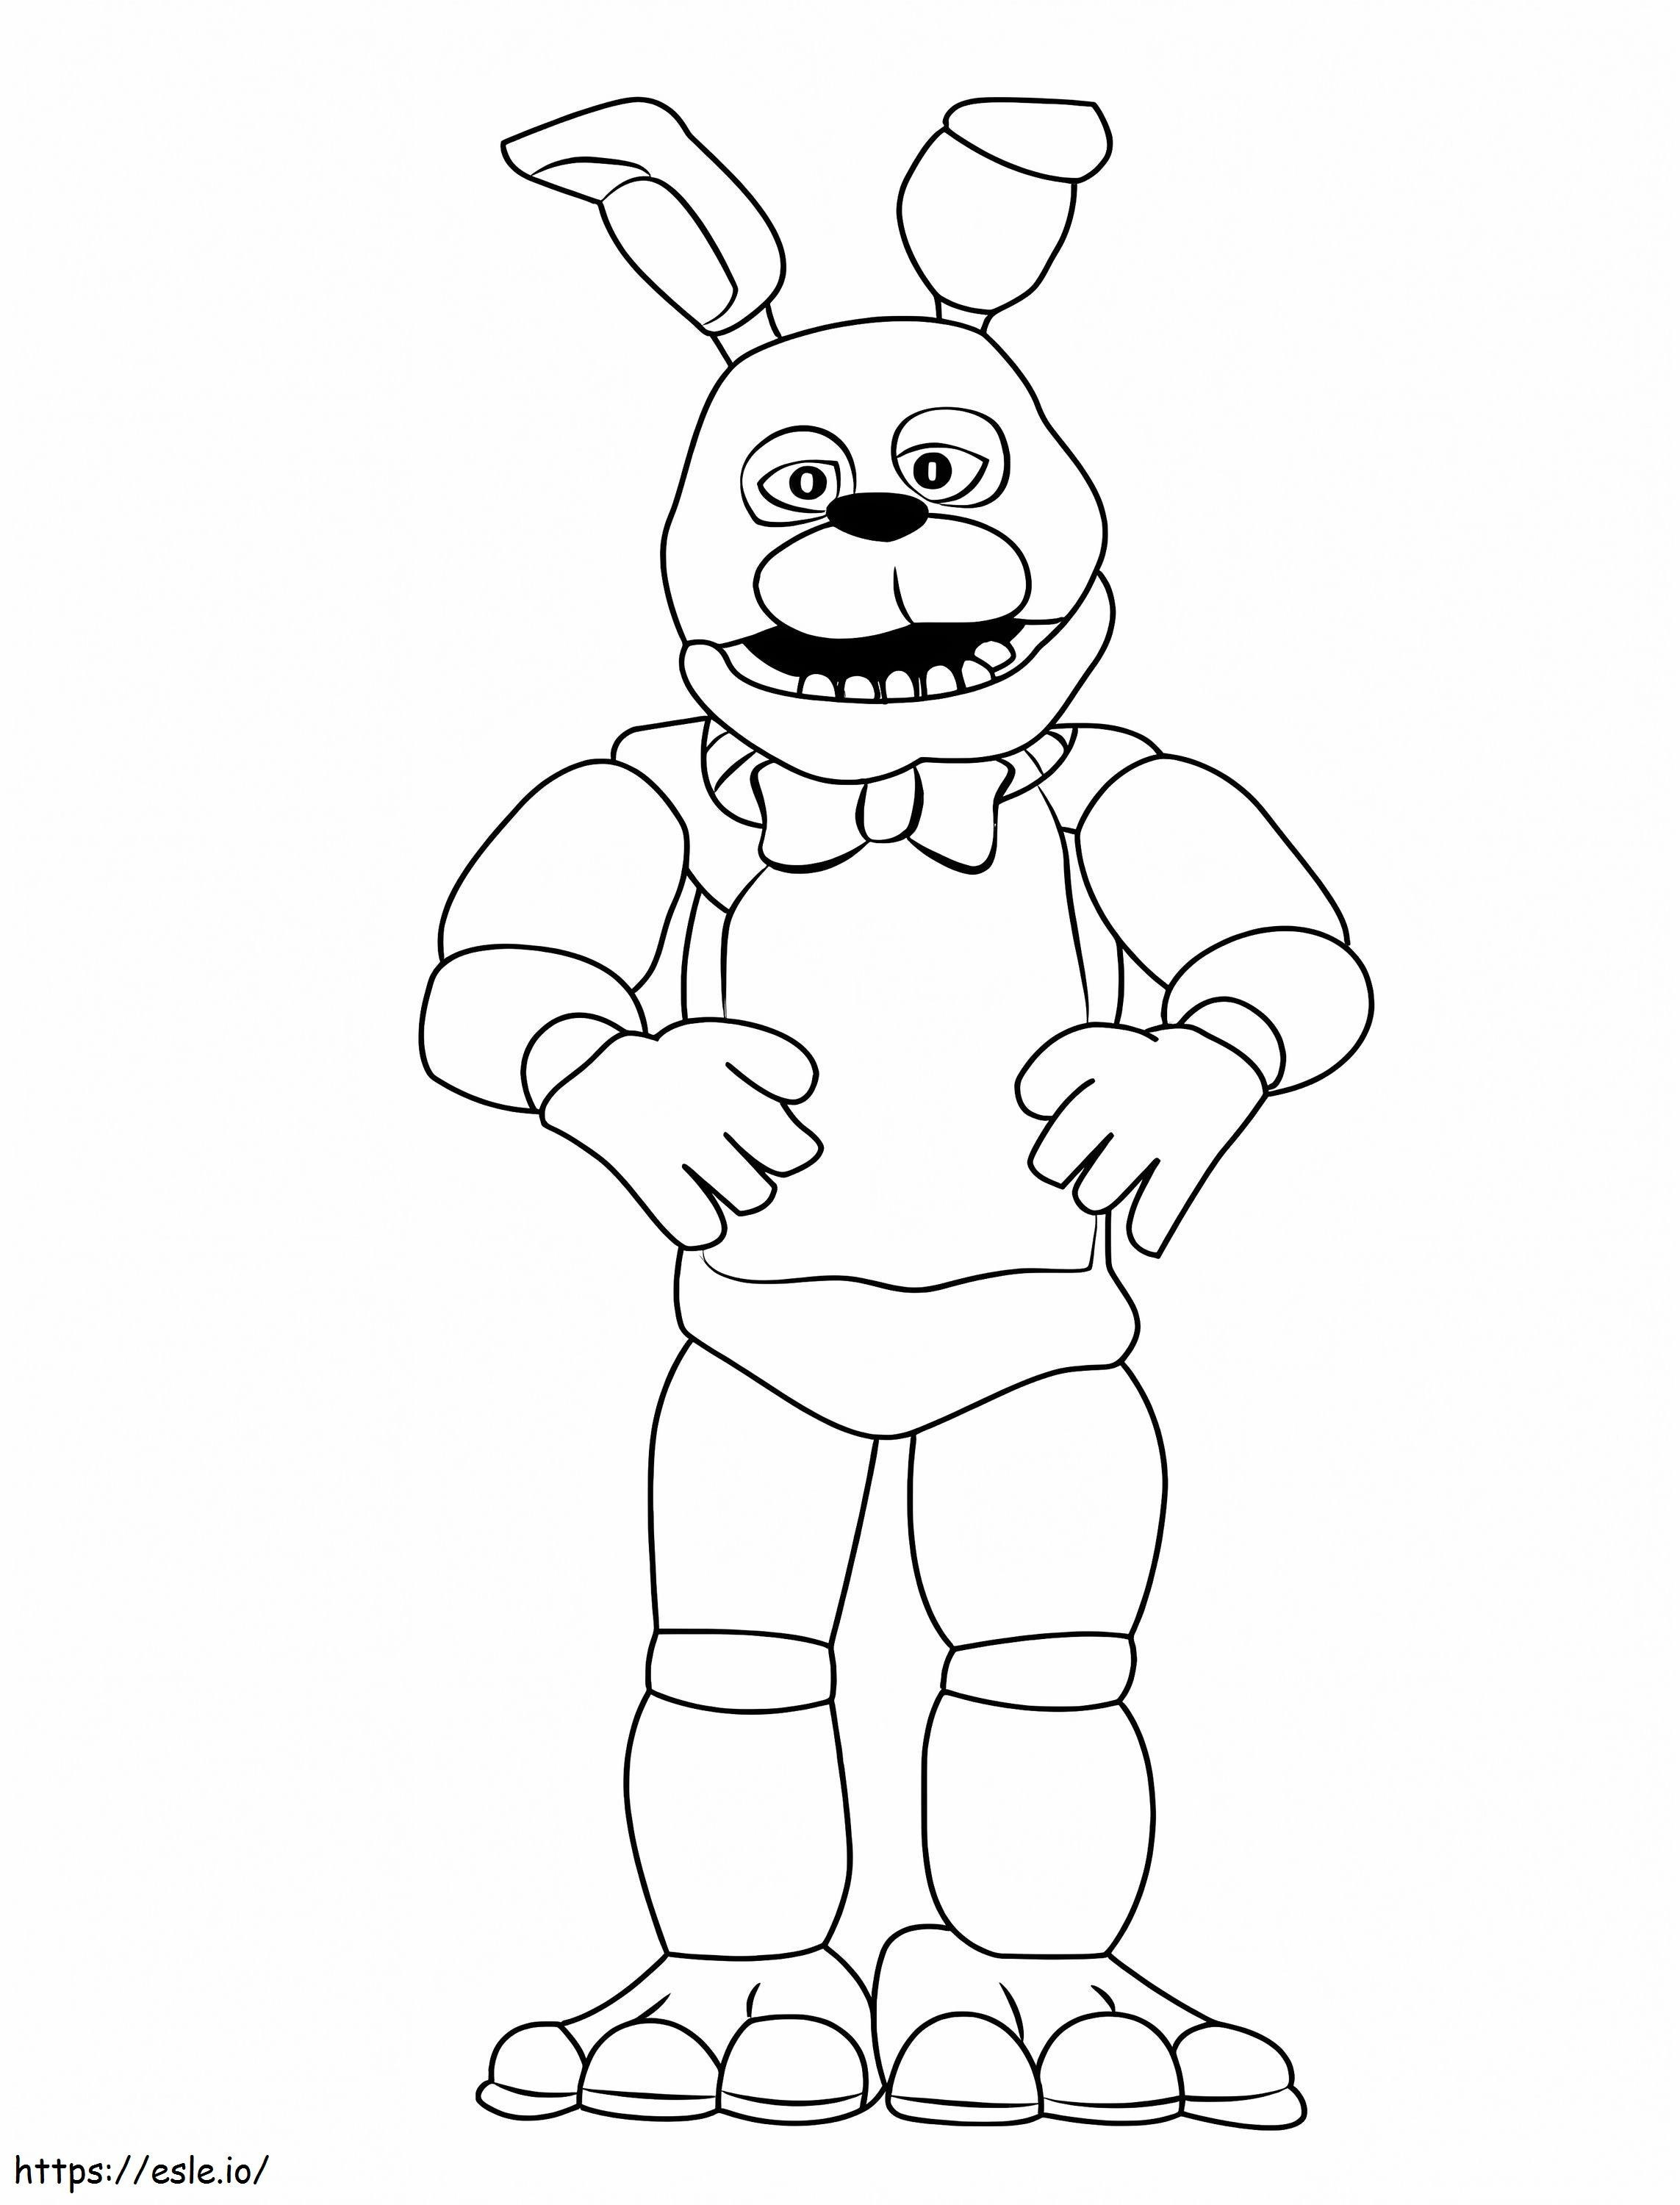 5 Nights At Freddys 1 coloring page